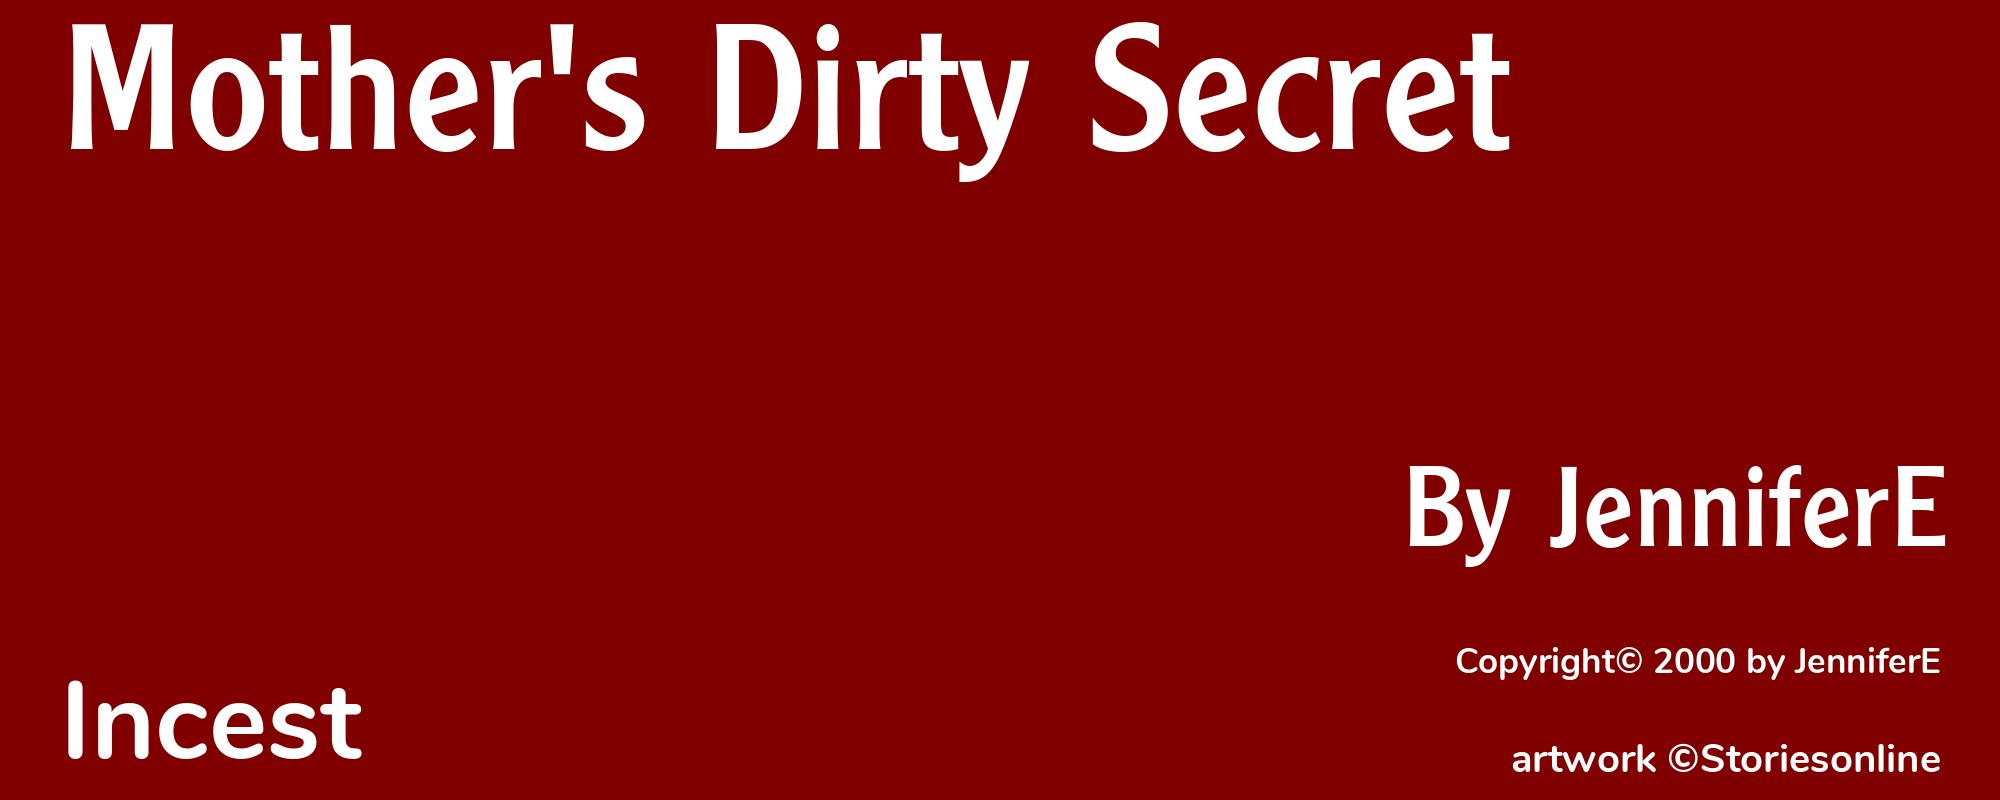 Mother's Dirty Secret - Cover